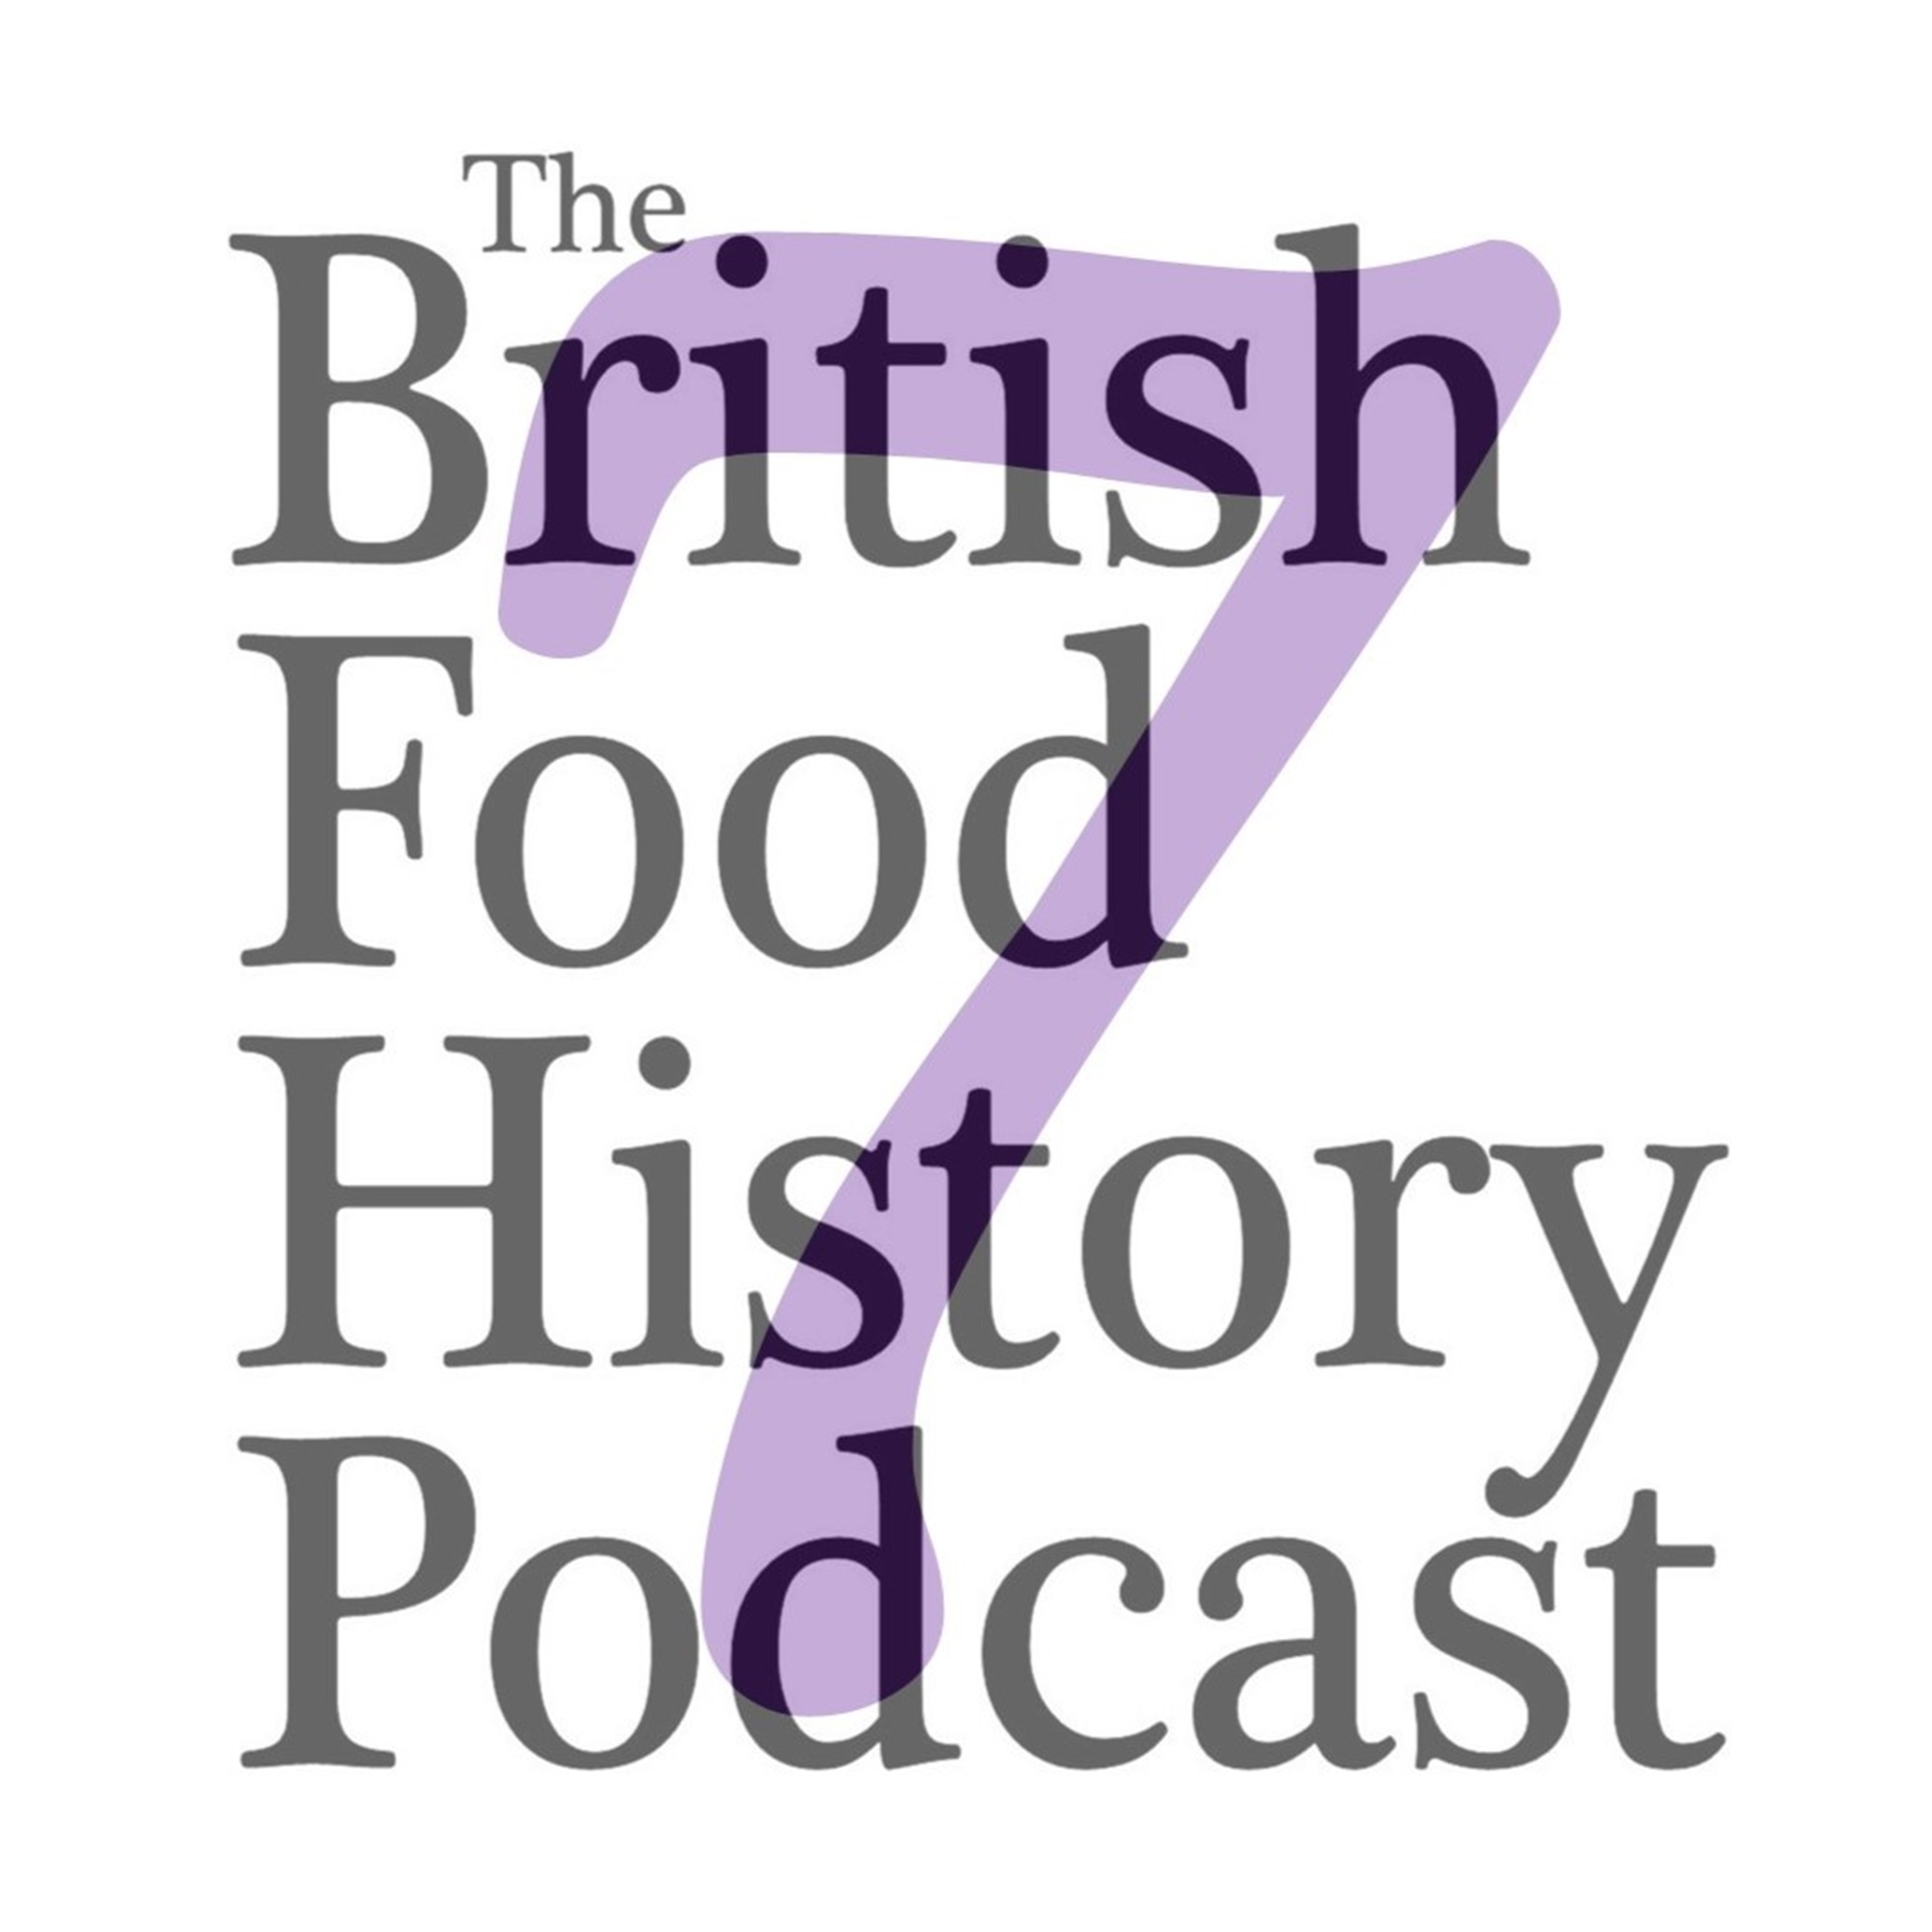 The Leeds Symposium on Food History & Traditions with Ivan Day